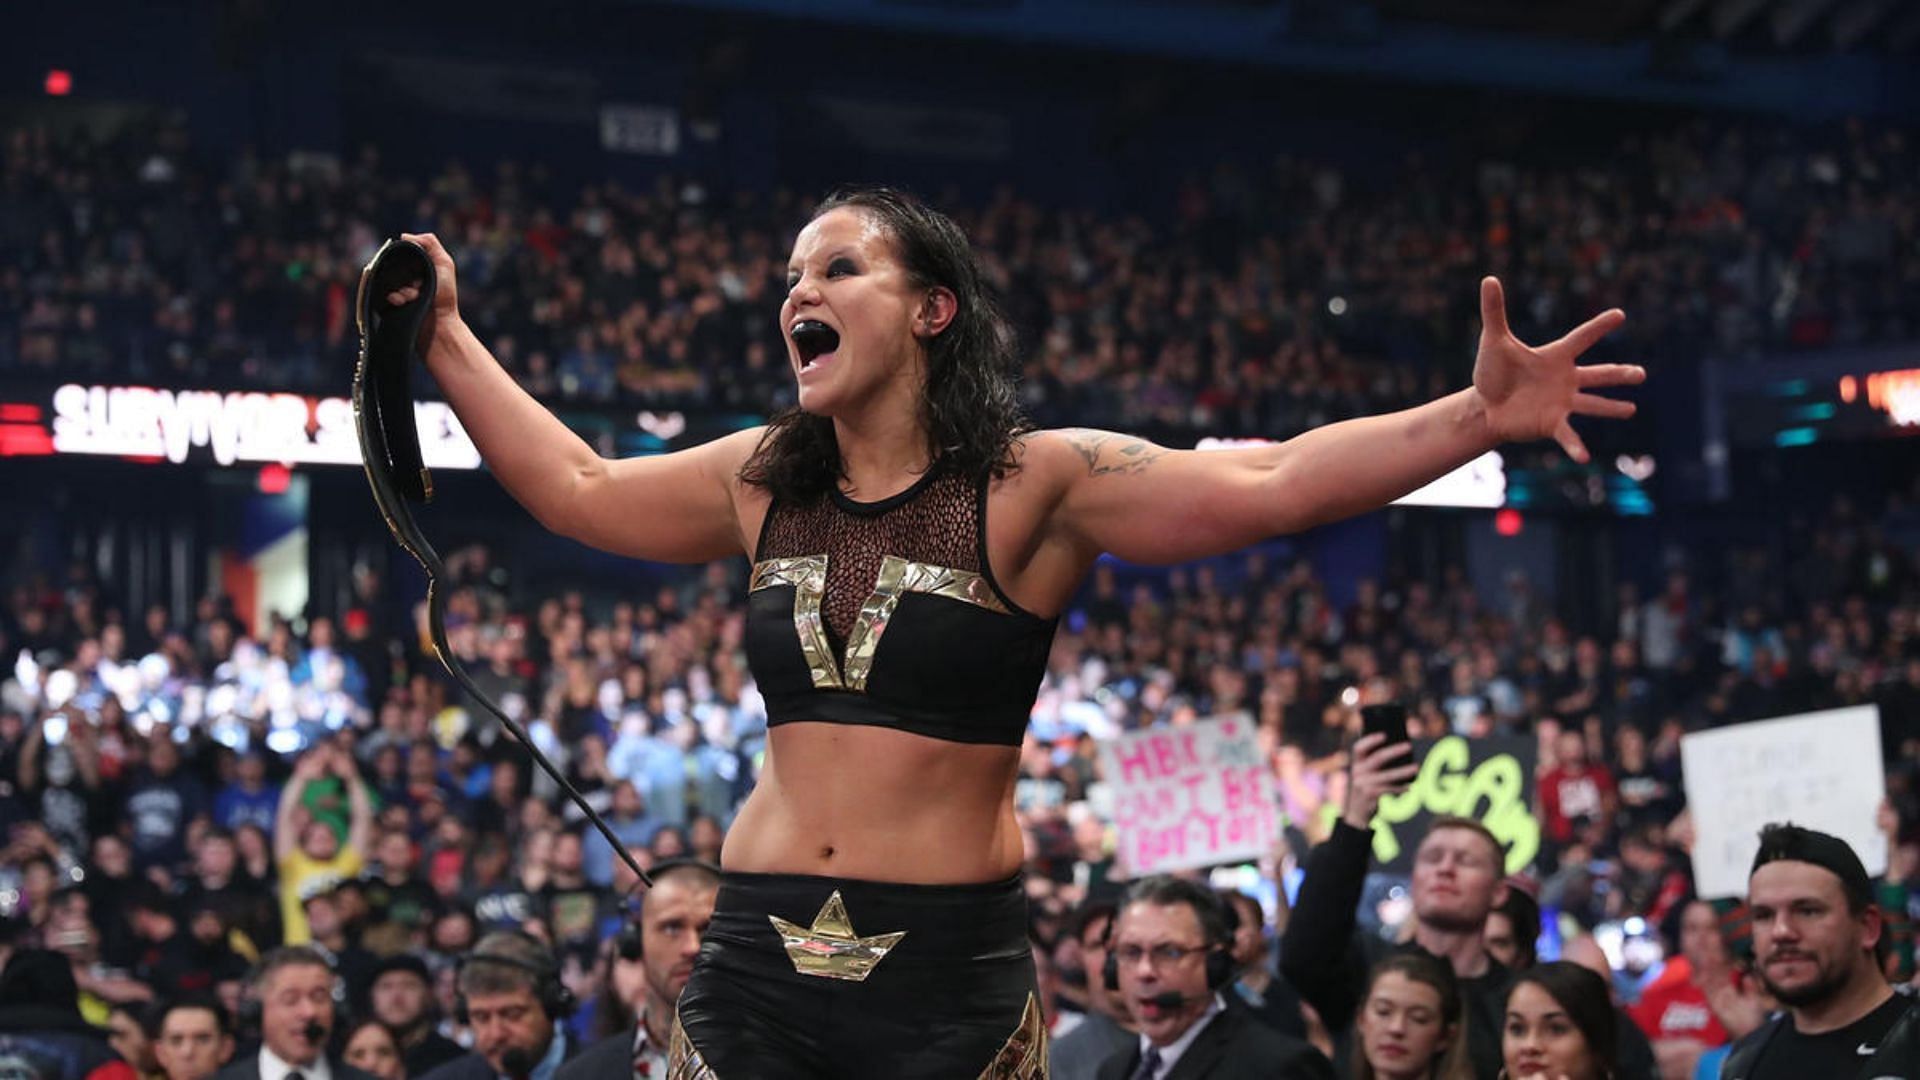 Shayna Baszler came out of the match a star.